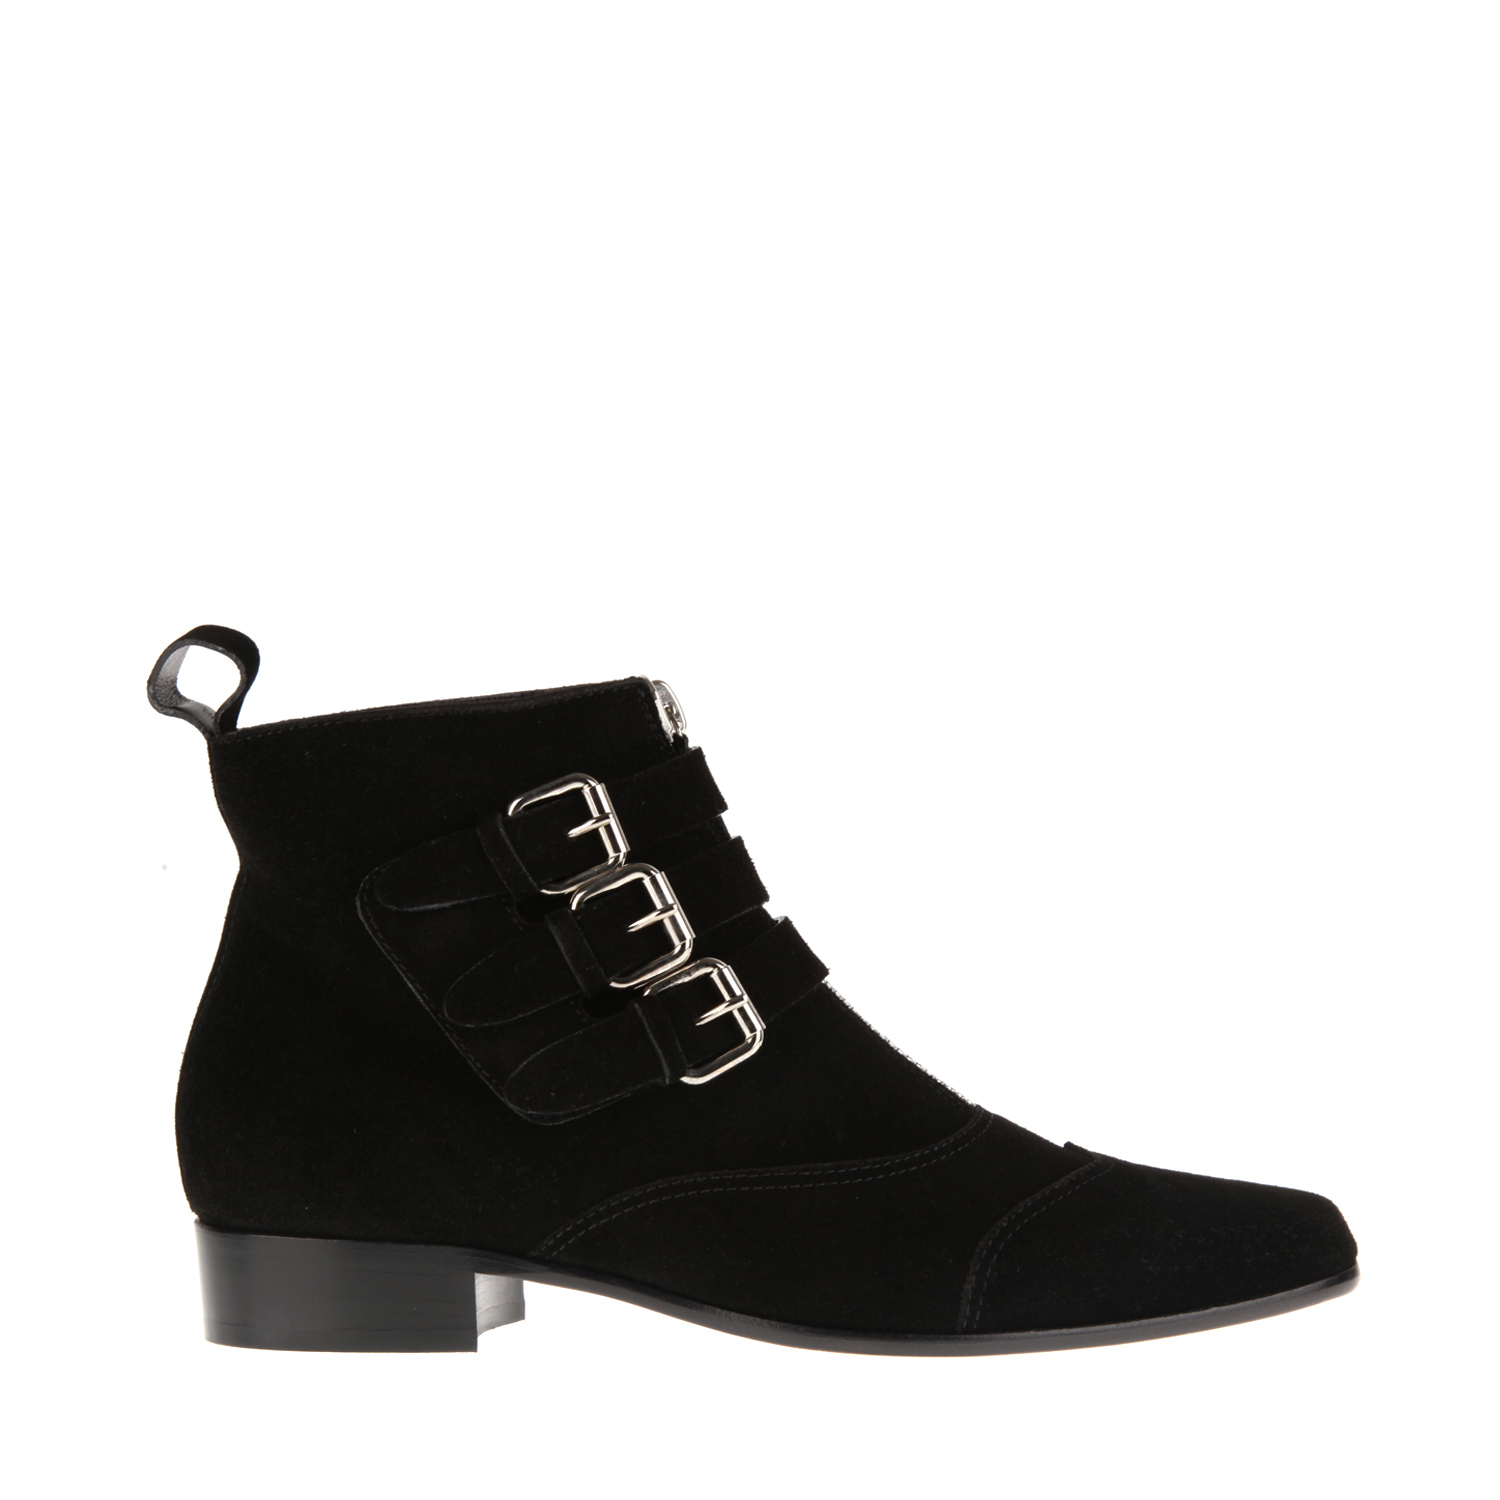 Tabitha Simmons Suede Wingtip Pointed Toe Ankle Boot in Black (silver ...